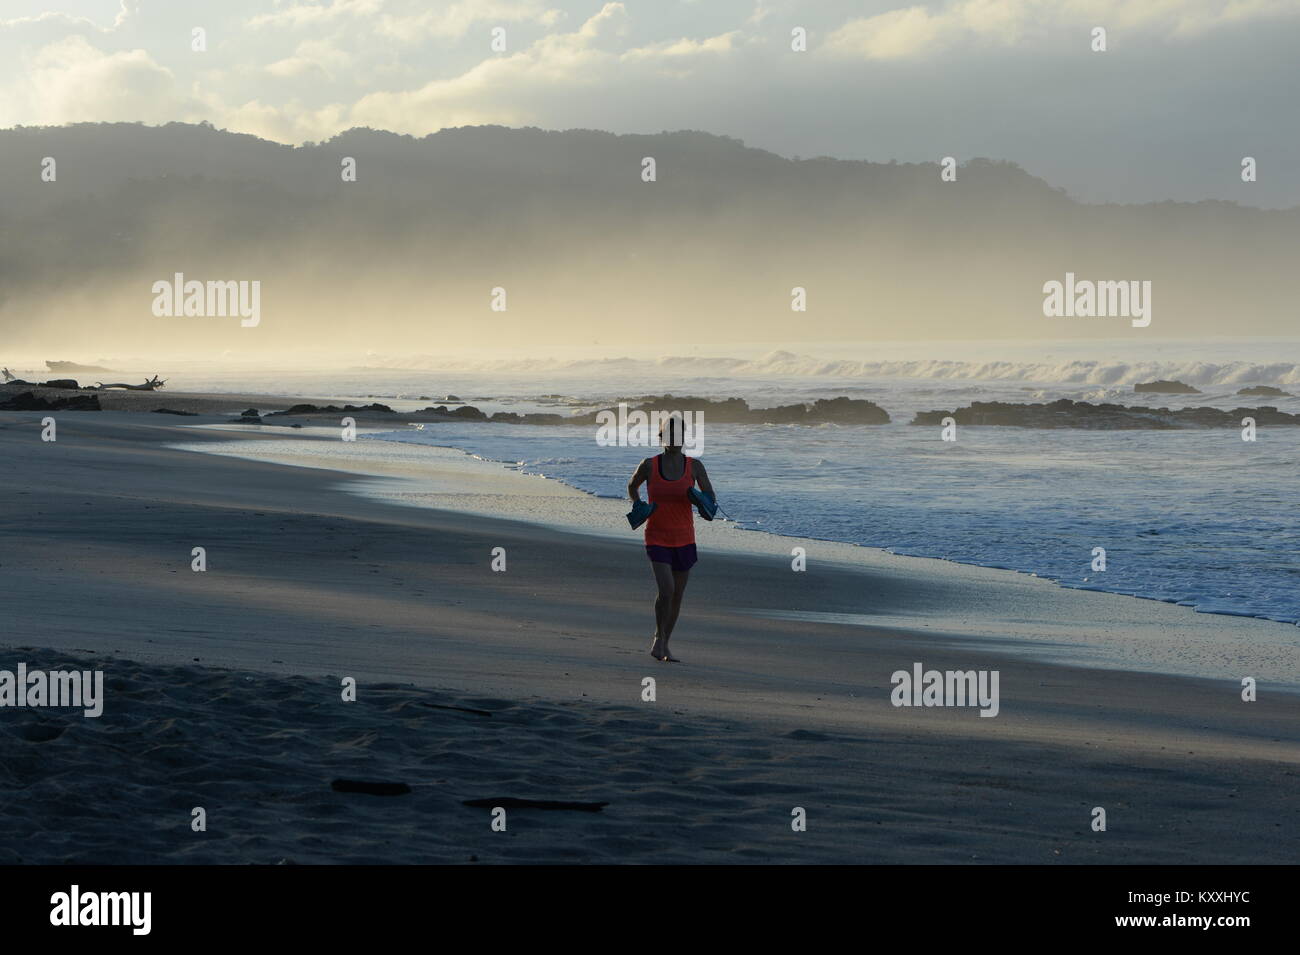 Running at dawn on a deserted beach, Costa Rica lifestyle Stock Photo